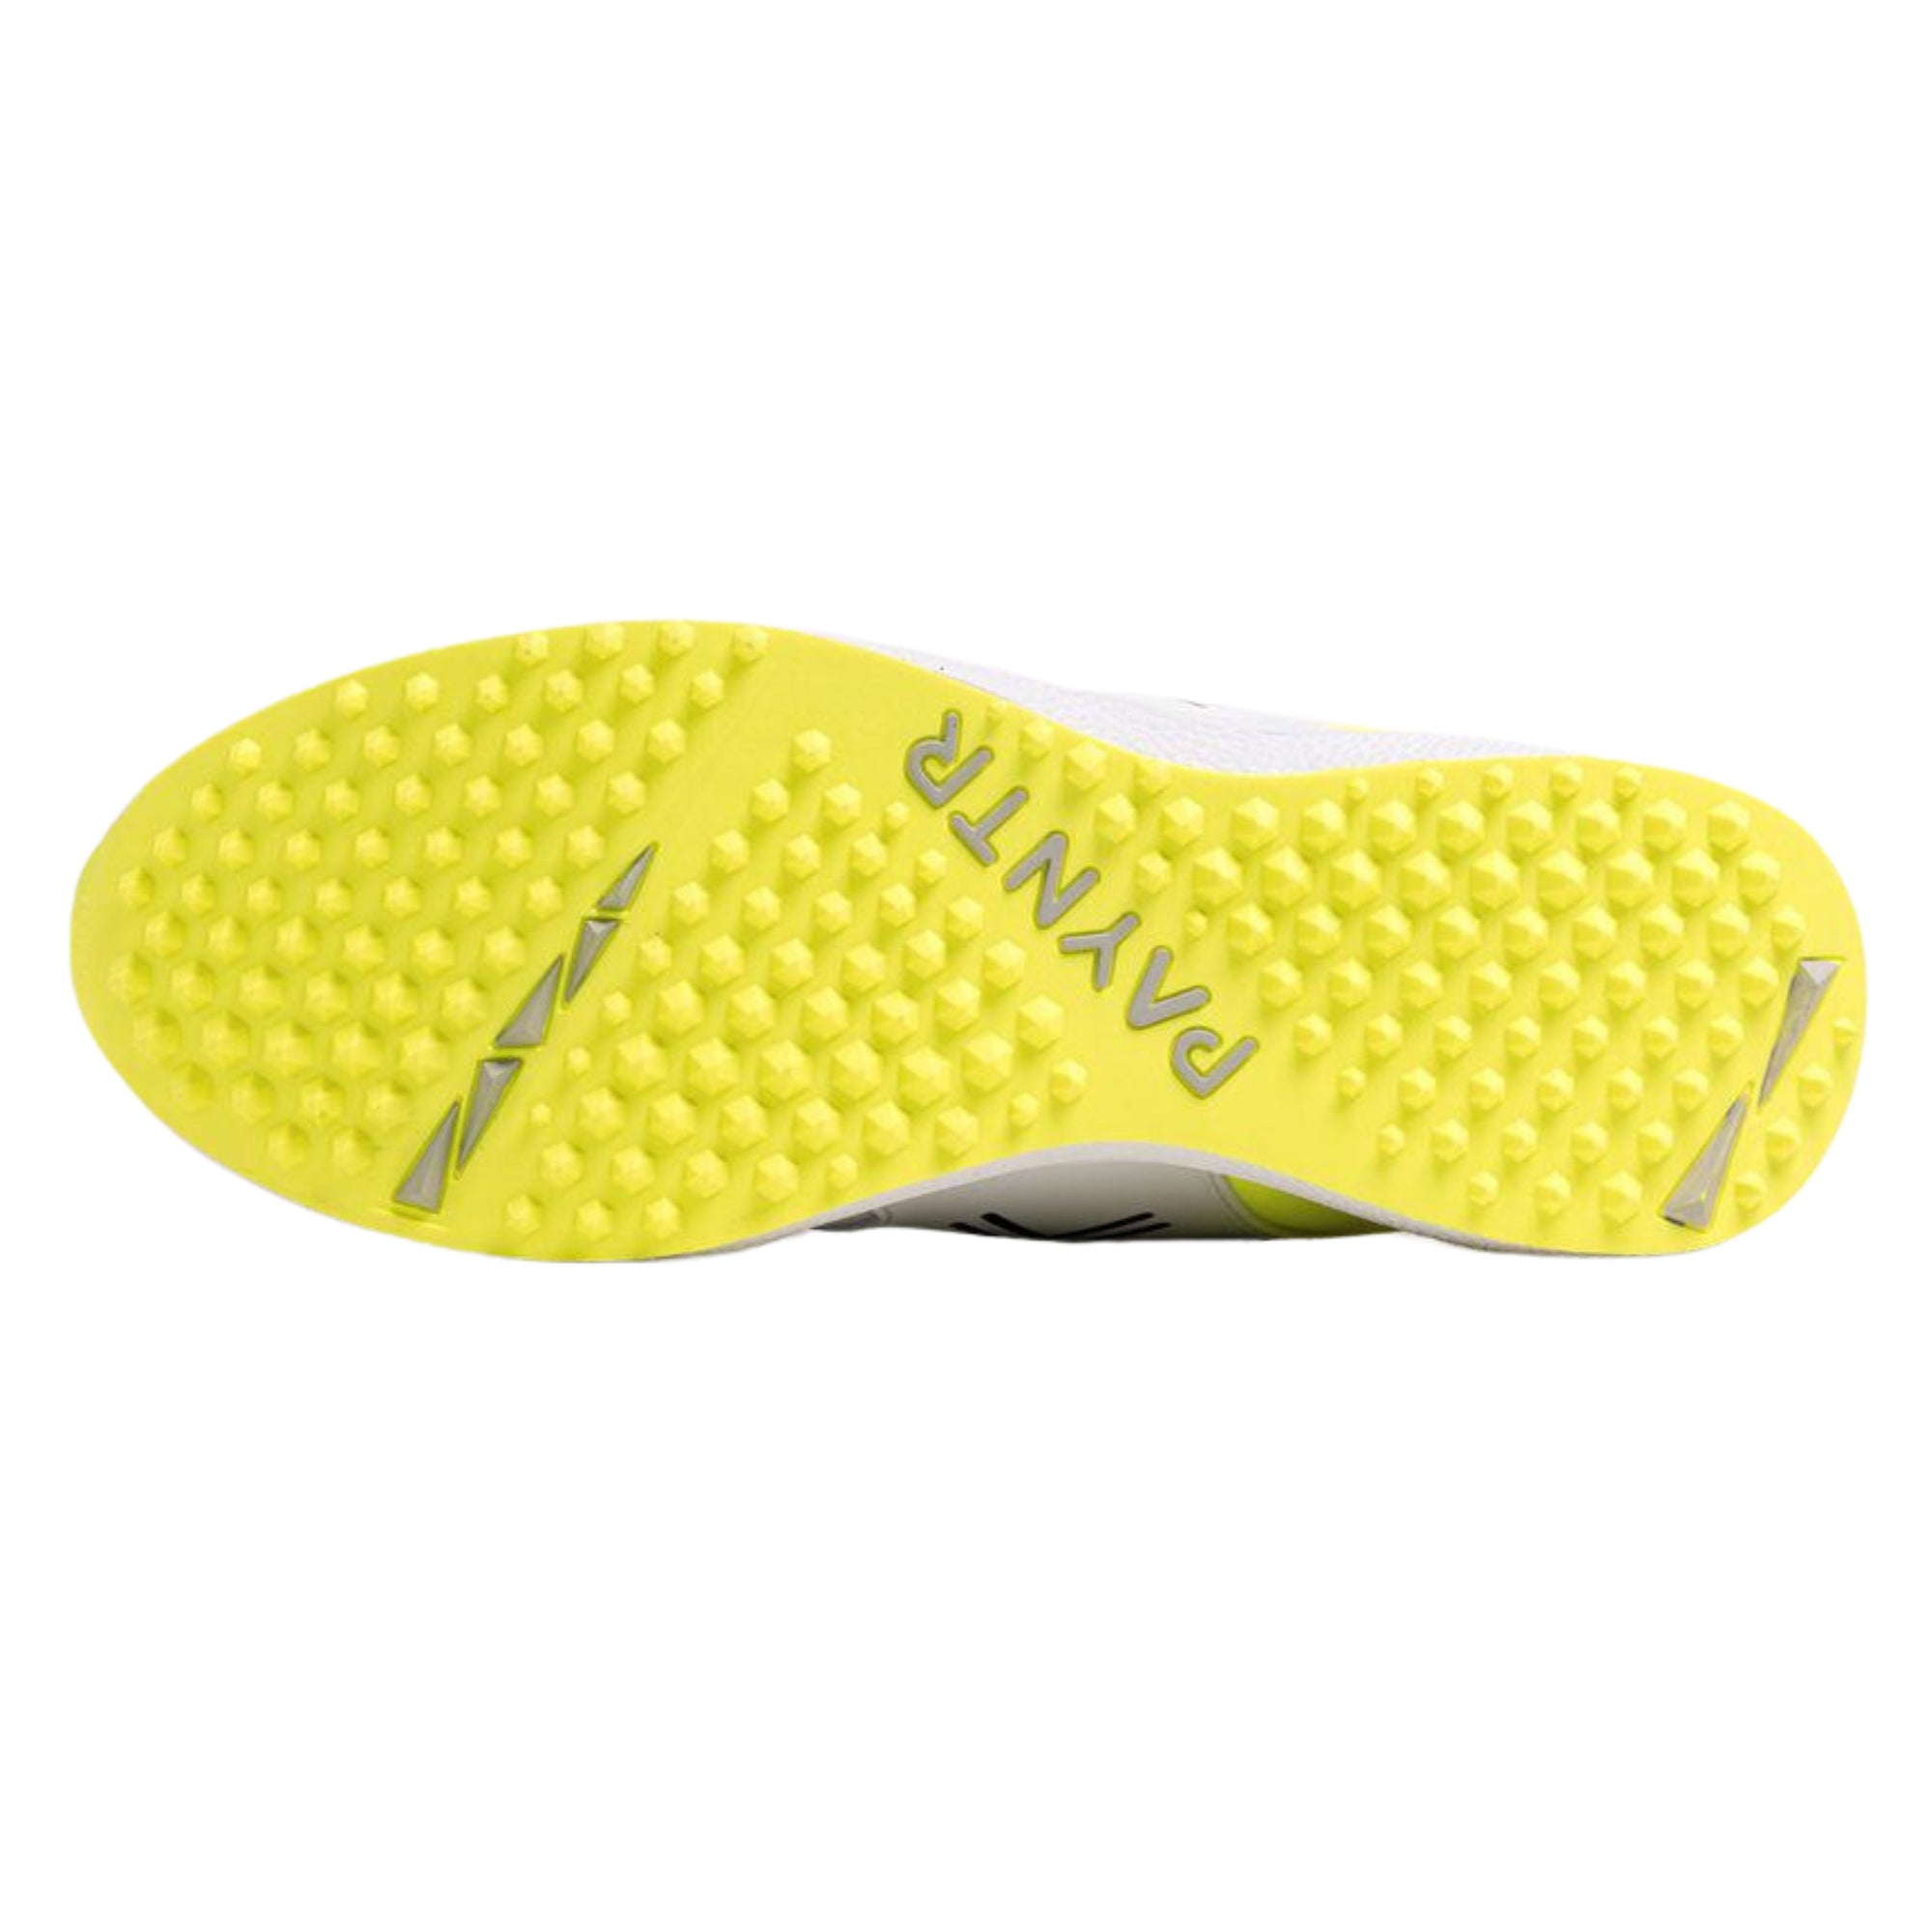 Payntr cricket shoes, Model X MK3 Evo Pimple - White/Yellow All Rounder Cricket Shoes